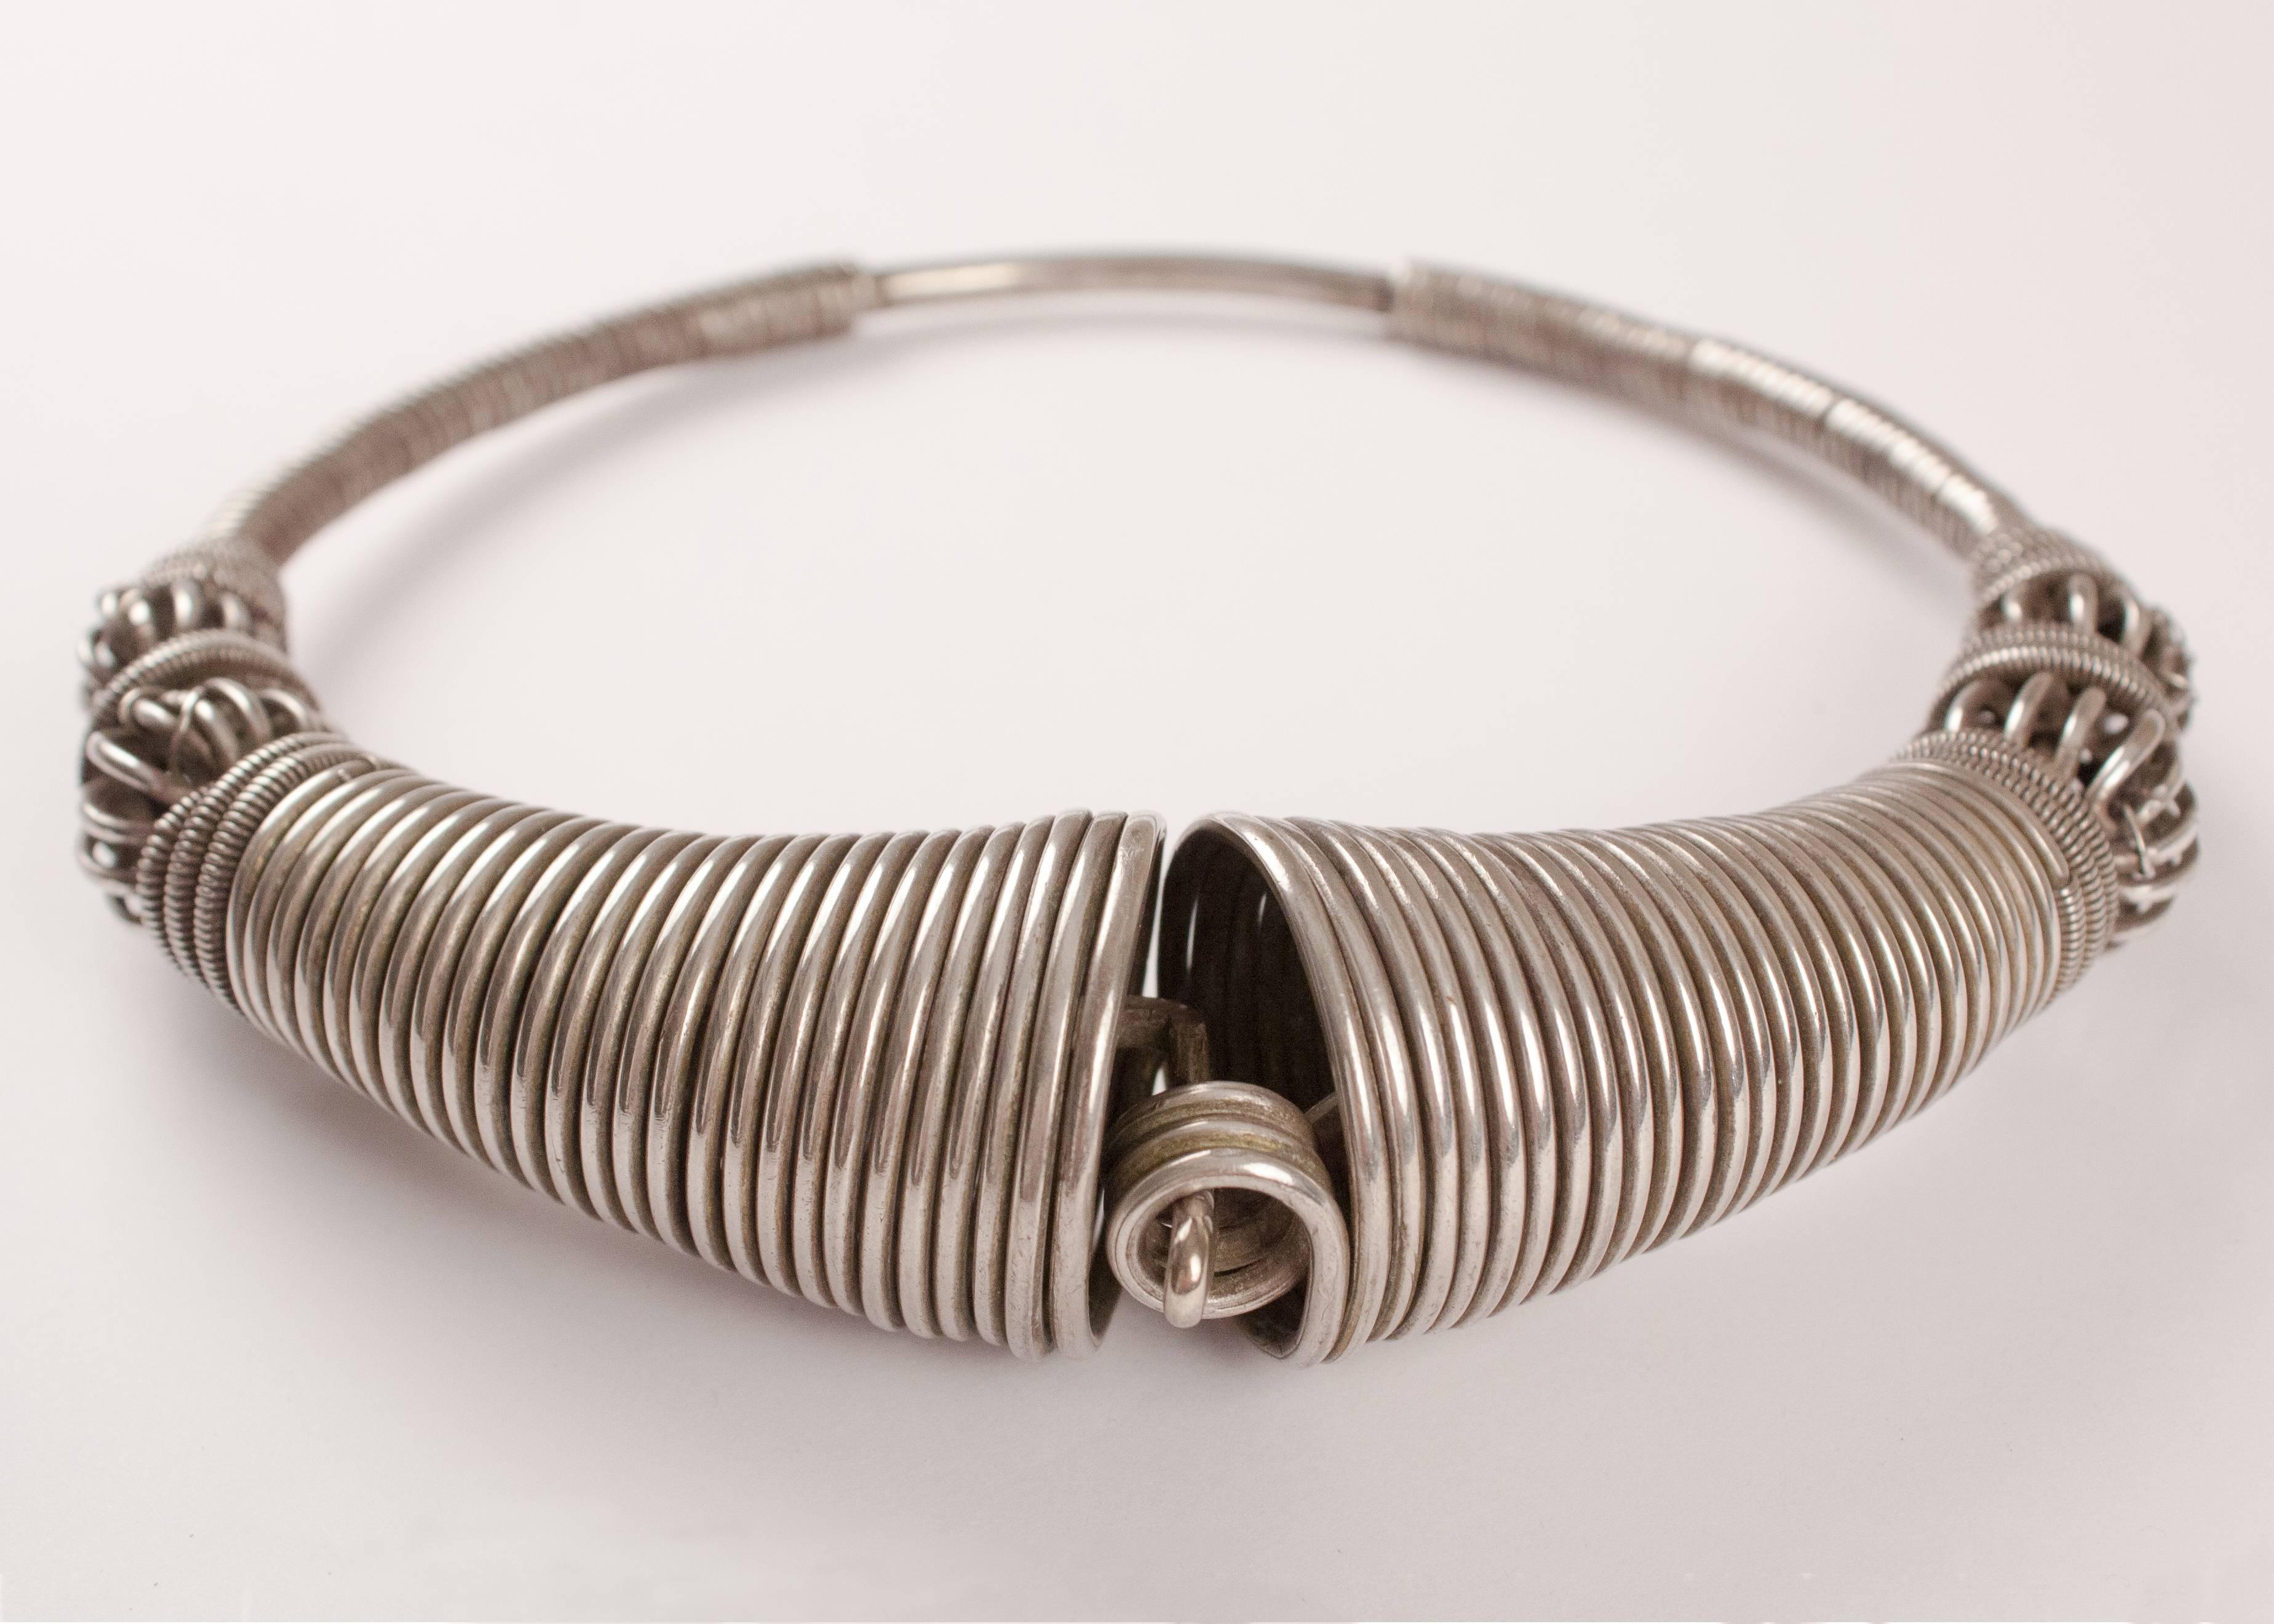 Traditional torque or Hansuli silver necklace from Gujarat in Northwest India, circa 1940. This sculptural and coiled choker looks truly amazing on any neck or collar. Measurements: 6.50 x 6.75 (outside diameter); 5.75 x 5 (inside diameter); 1.38